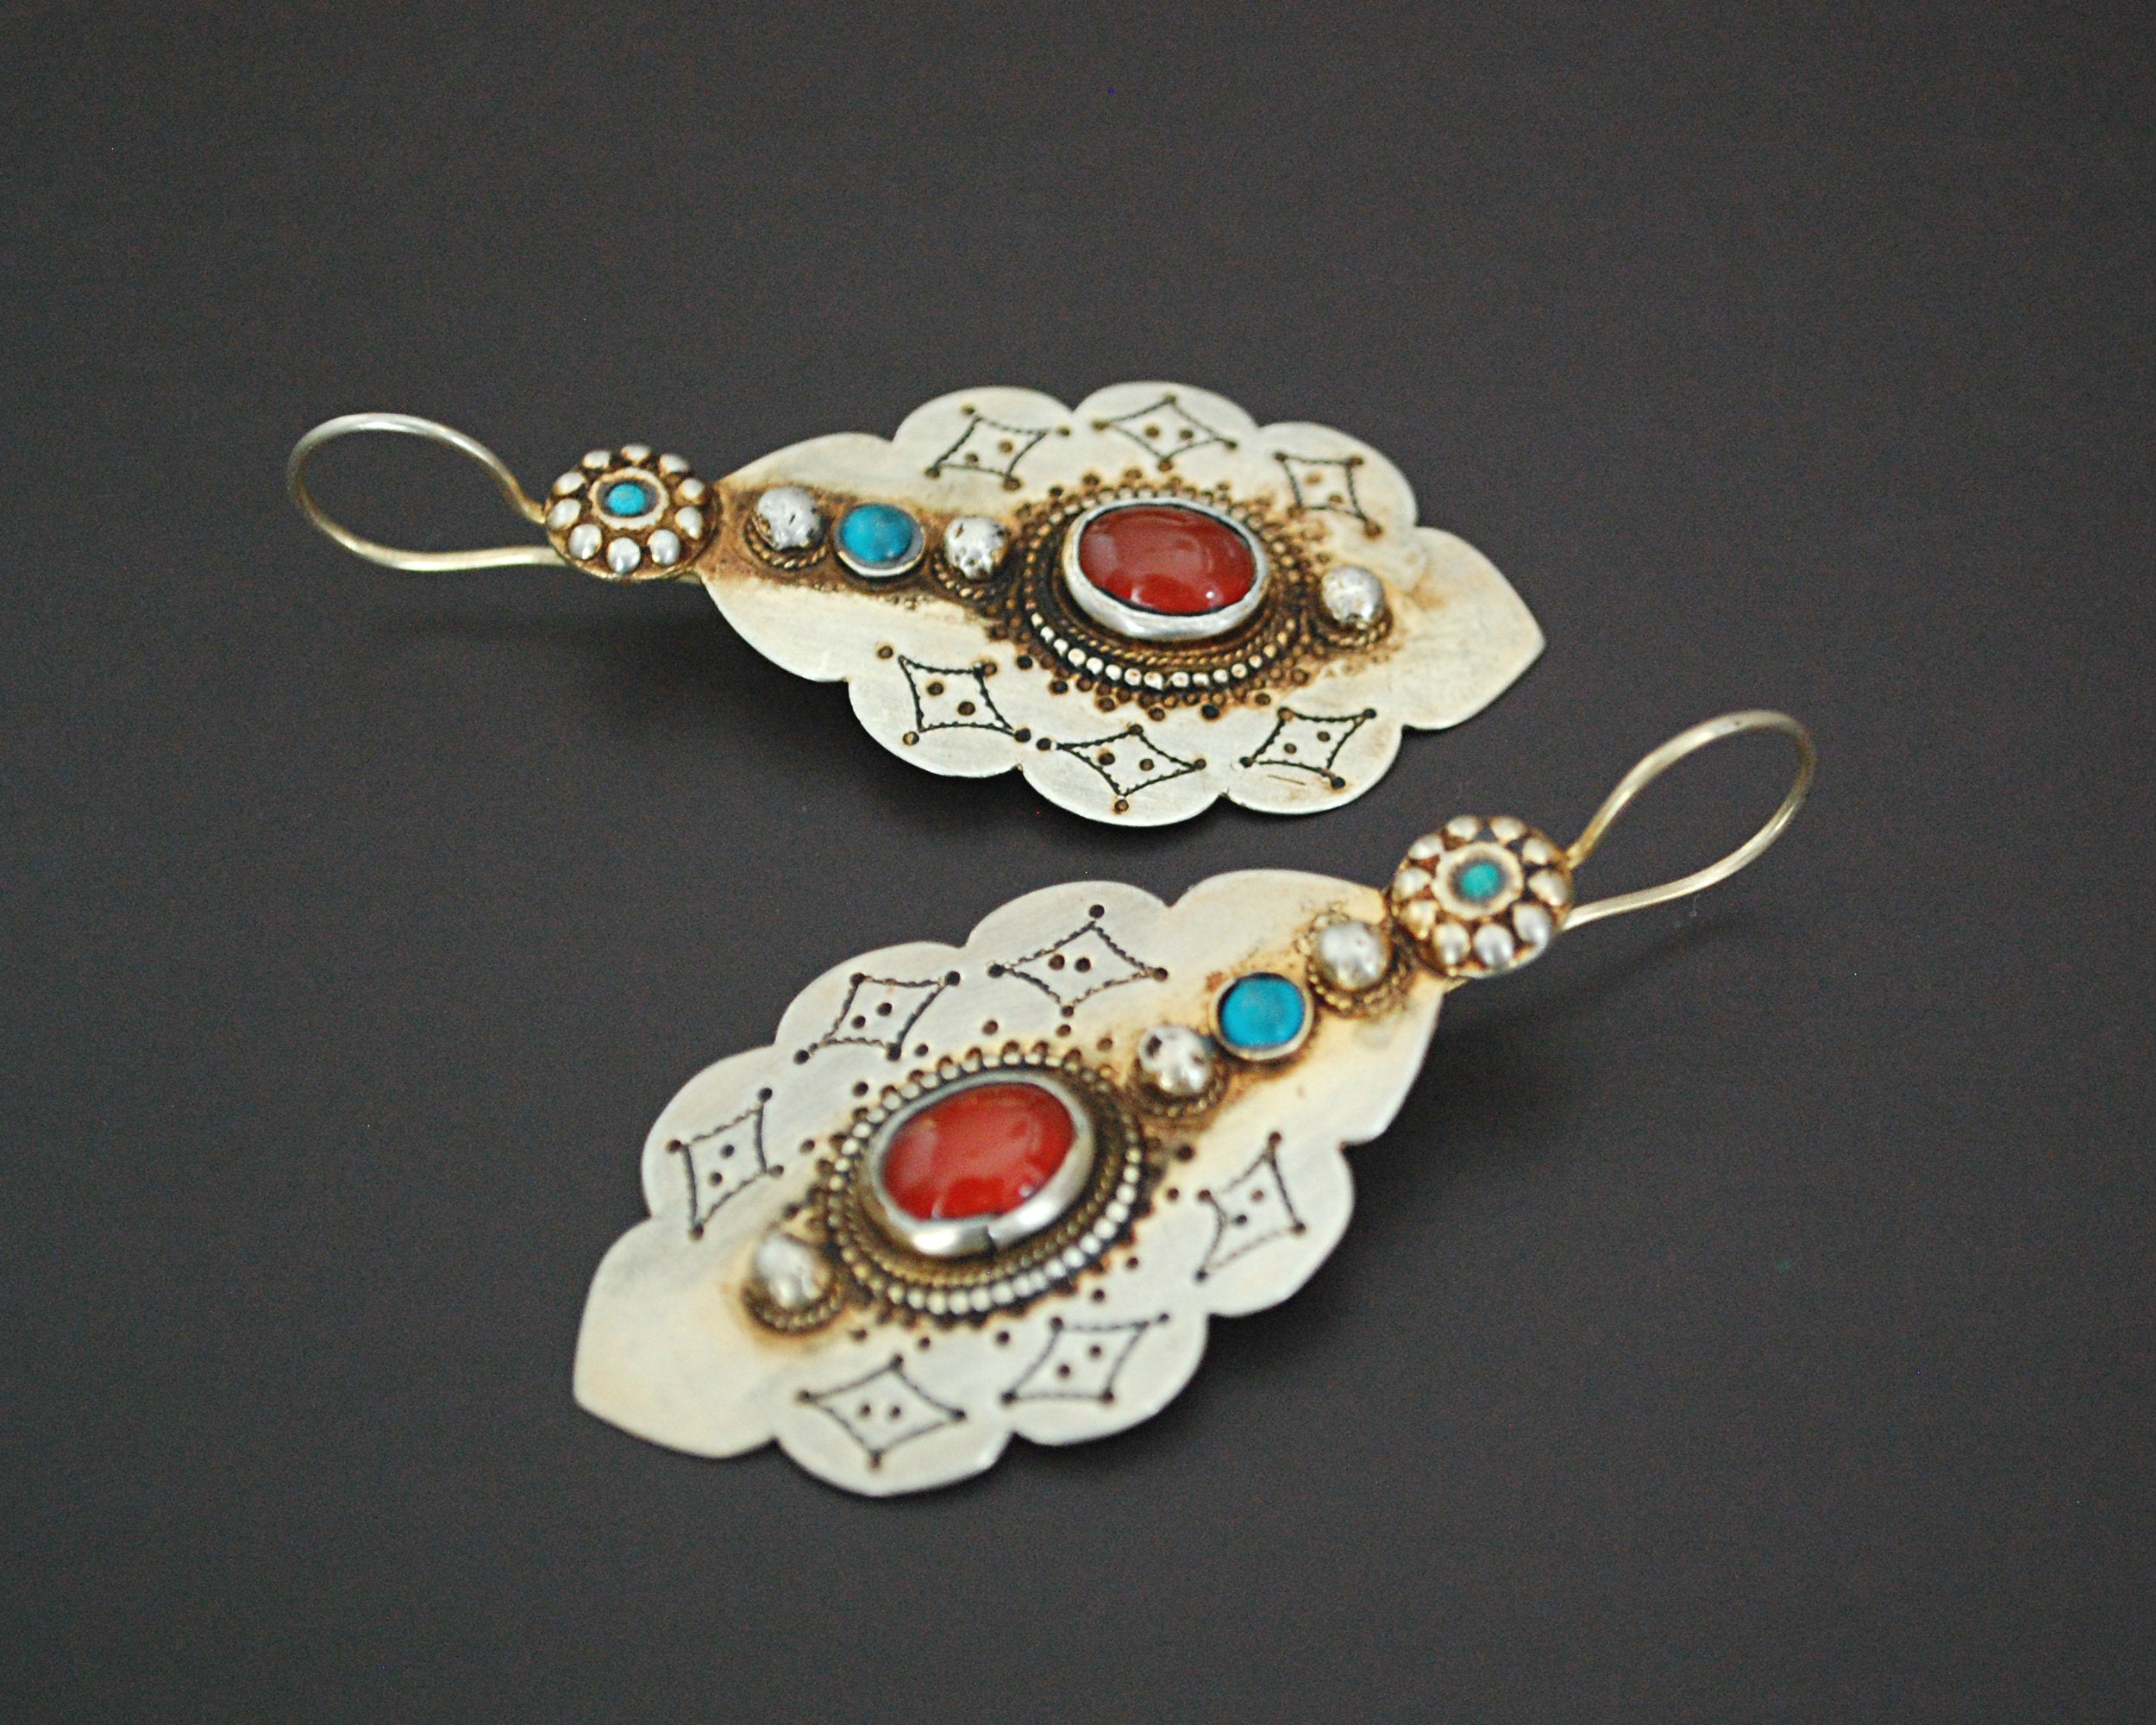 Turkmen Gilded Earrings with Carnelian and Turquoise